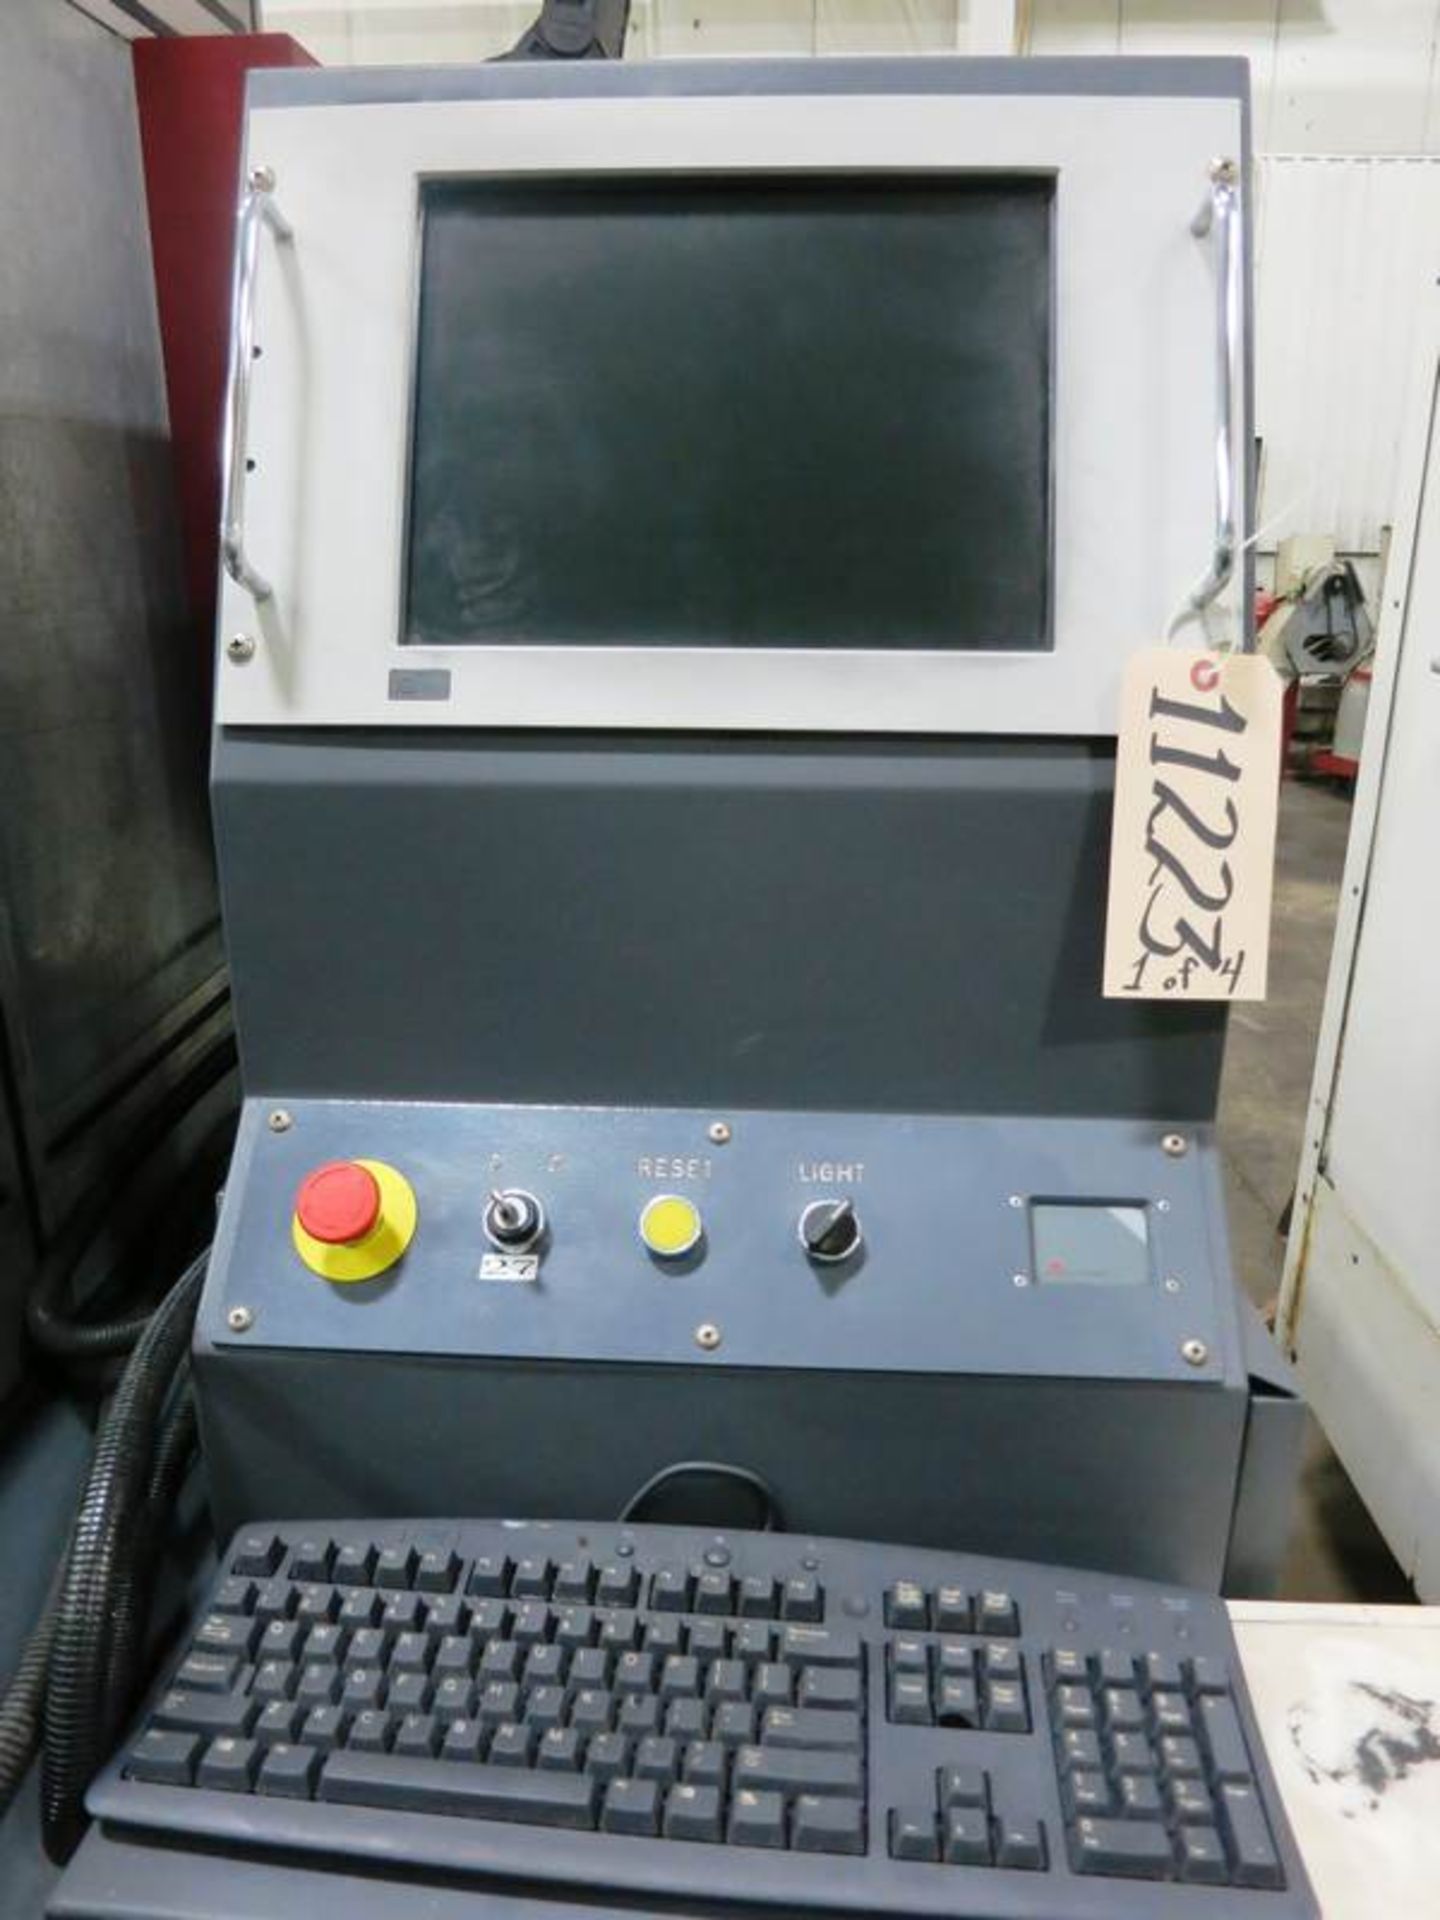 Roders TEC RFM 600 CNC 3-Axis High speed Vertical Machining Center, S/N 87995-43, New 1998 General - Image 2 of 9